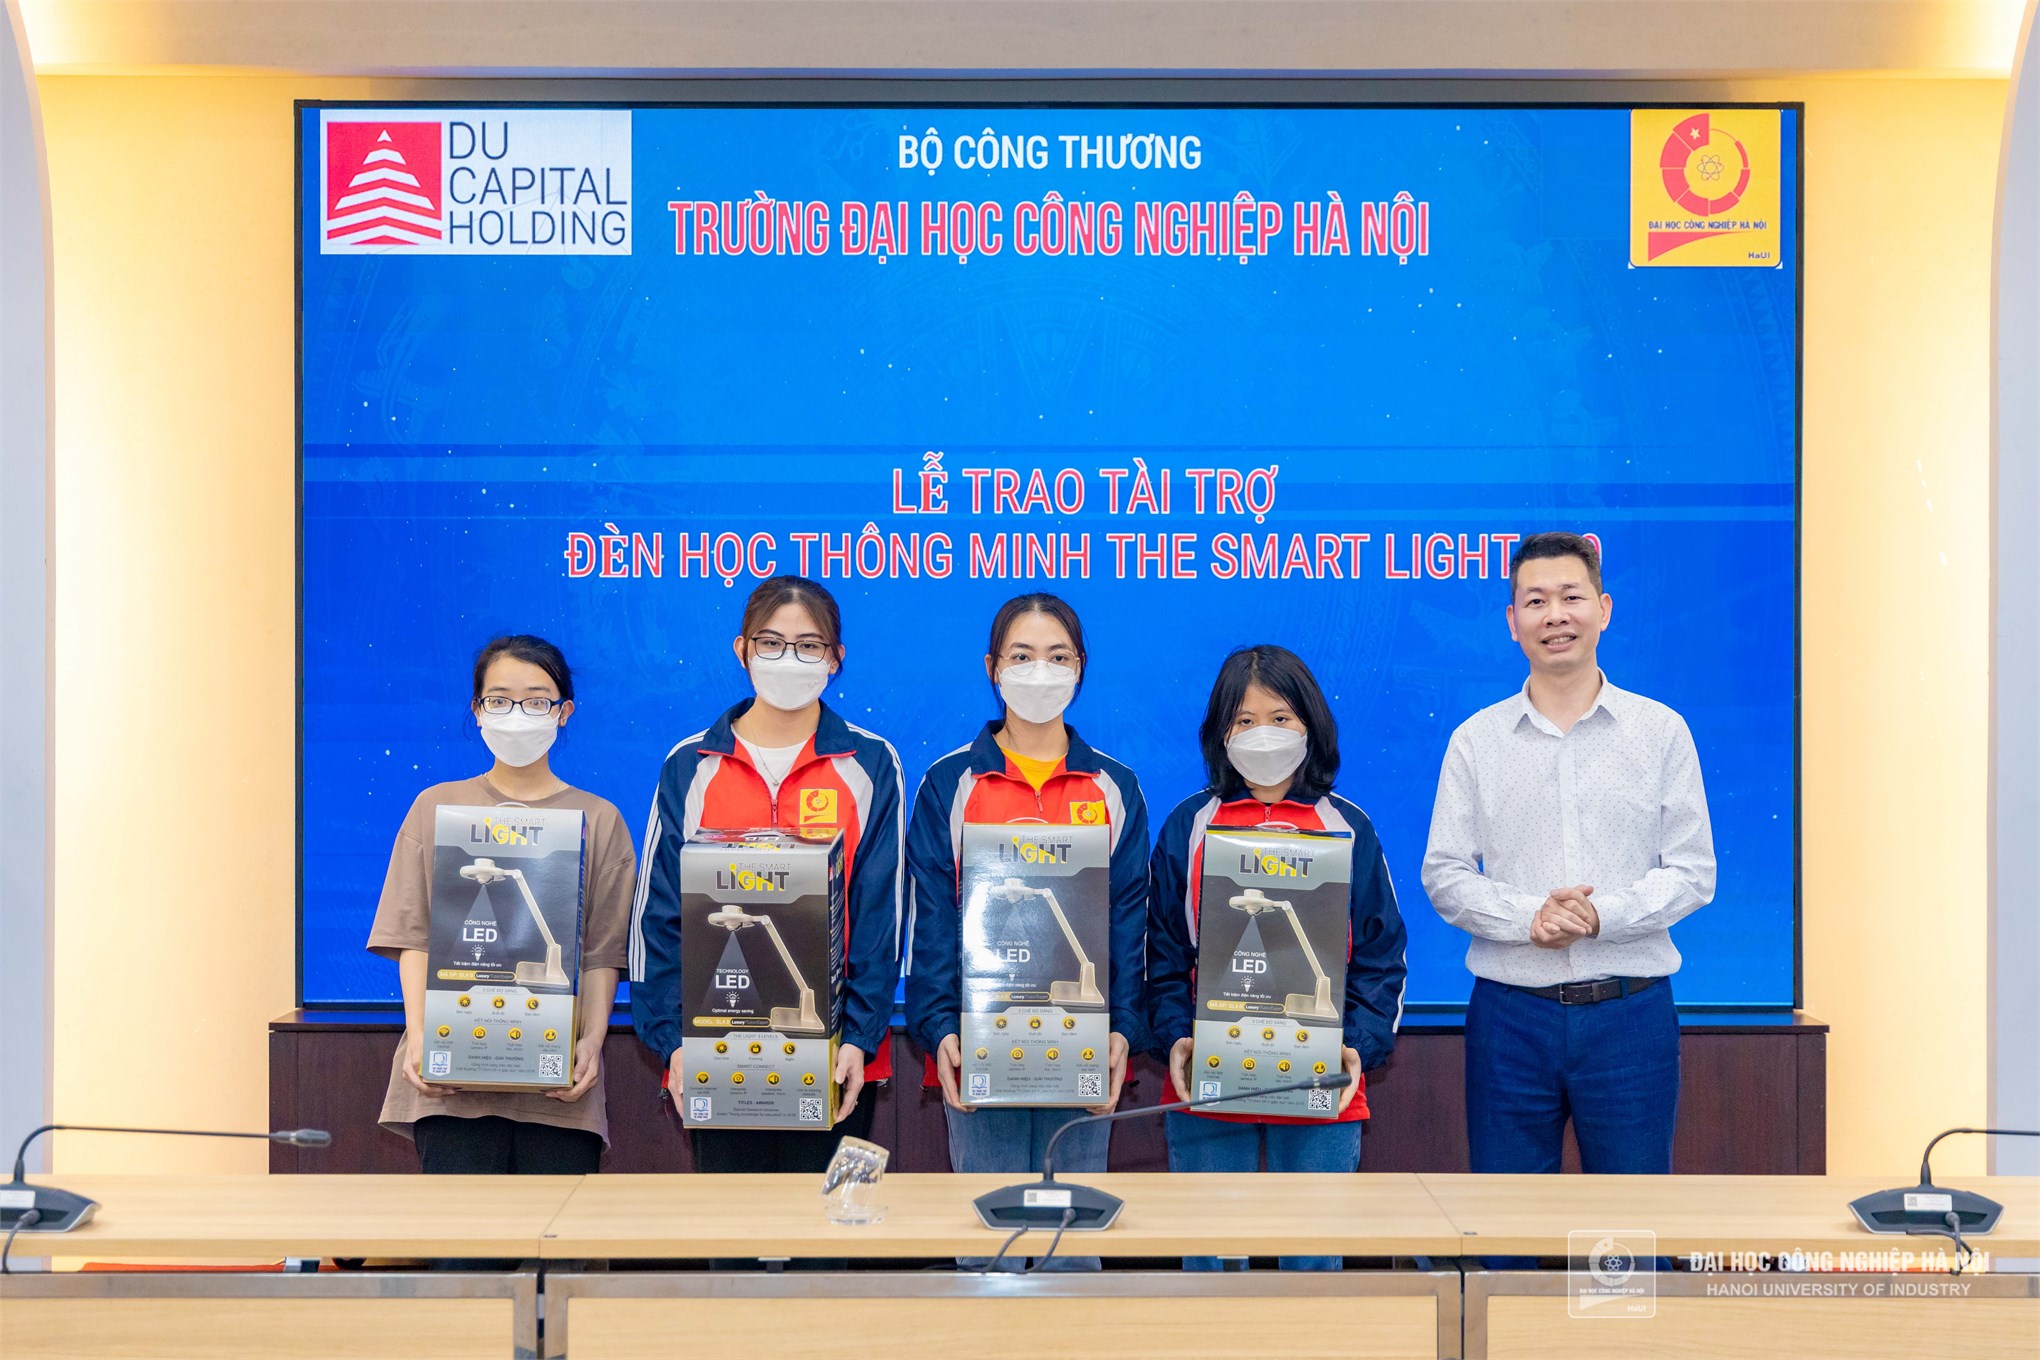 DUCAPITAL Holding presents smart desk lamps to students of Hanoi University of Industry